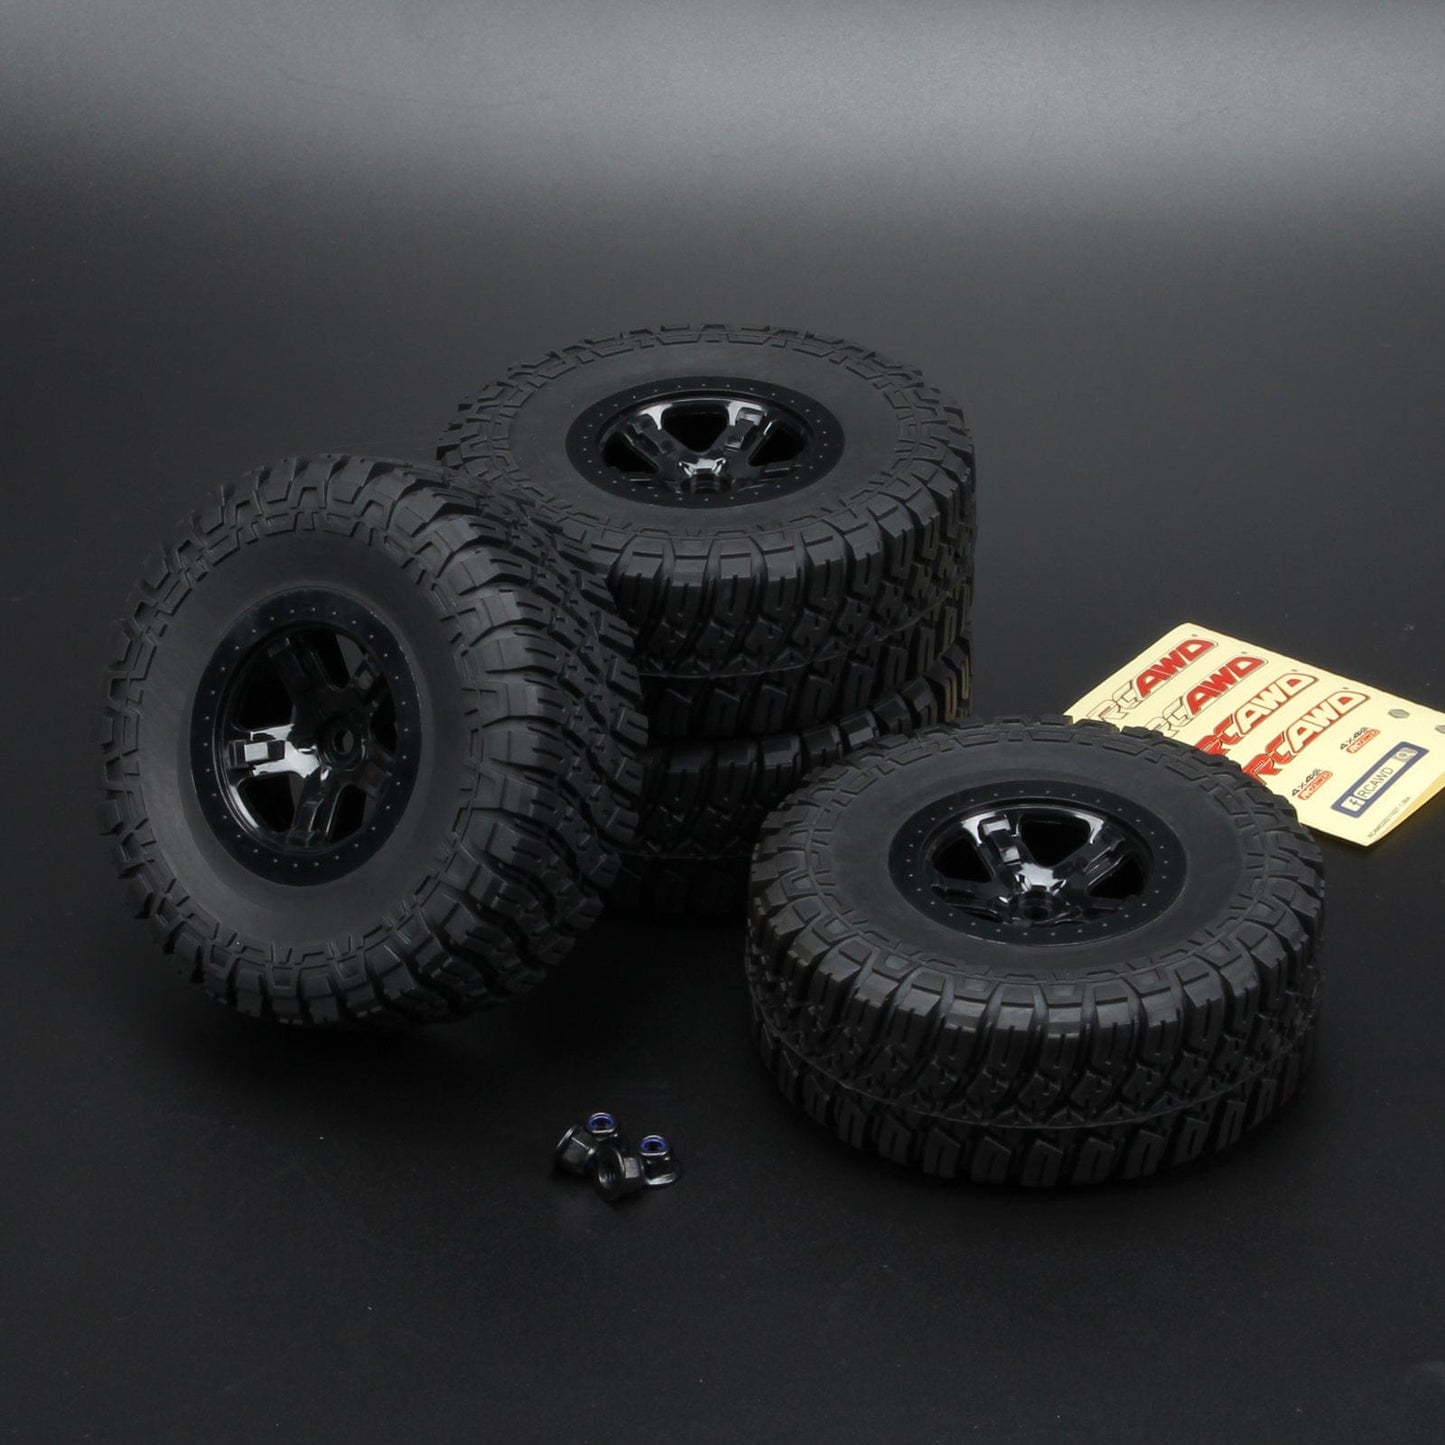 RCAWD LOSI Baja Rey 4WD Square Tires RCAWD Losi Baja Rey 4WD Upgrades Alpine Front/Rear 2.2/3.0 Pre-Mounted 5 Spokes Tires 的副本